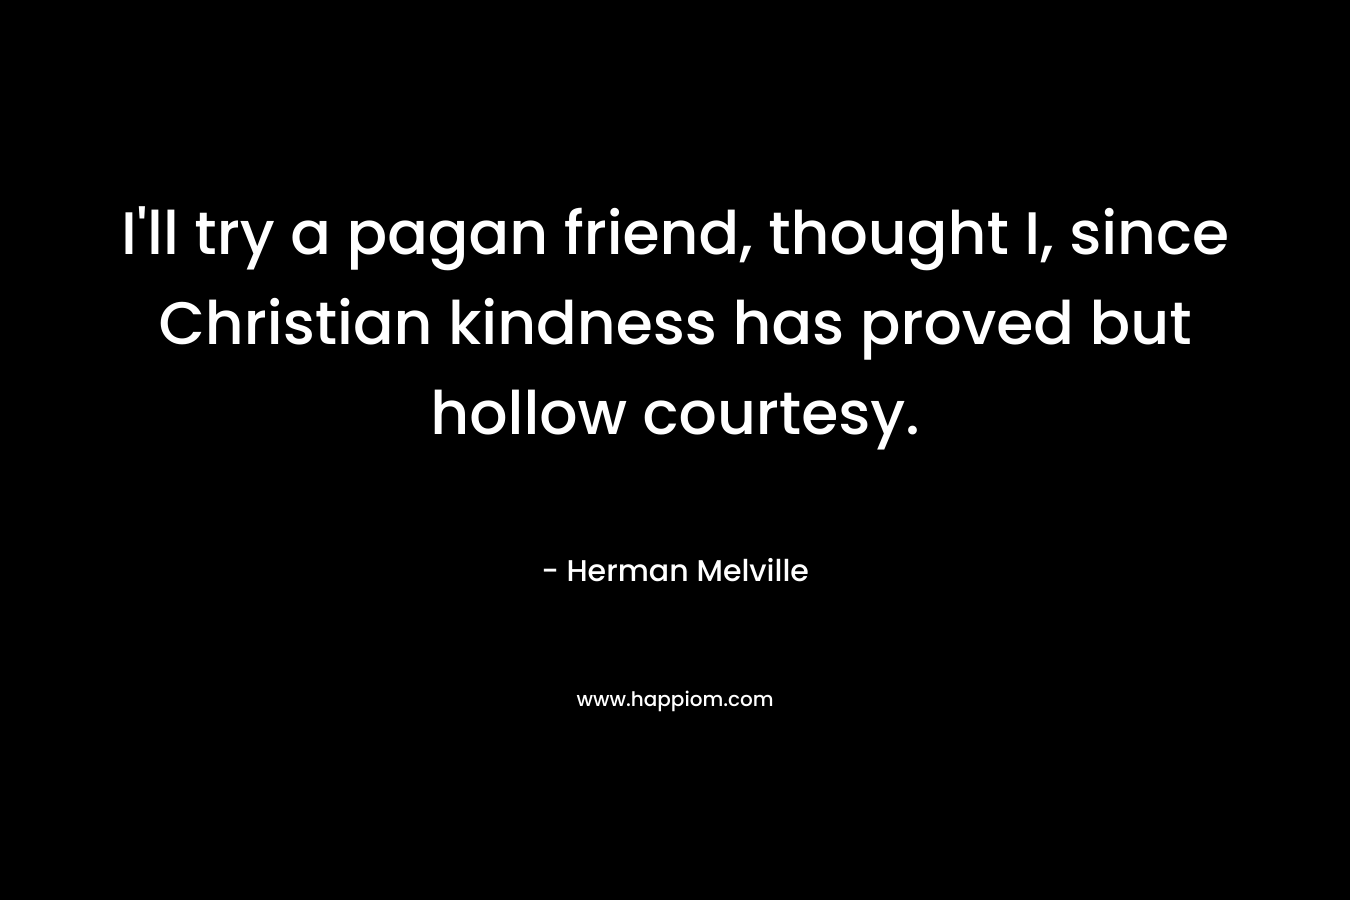 I’ll try a pagan friend, thought I, since Christian kindness has proved but hollow courtesy. – Herman Melville